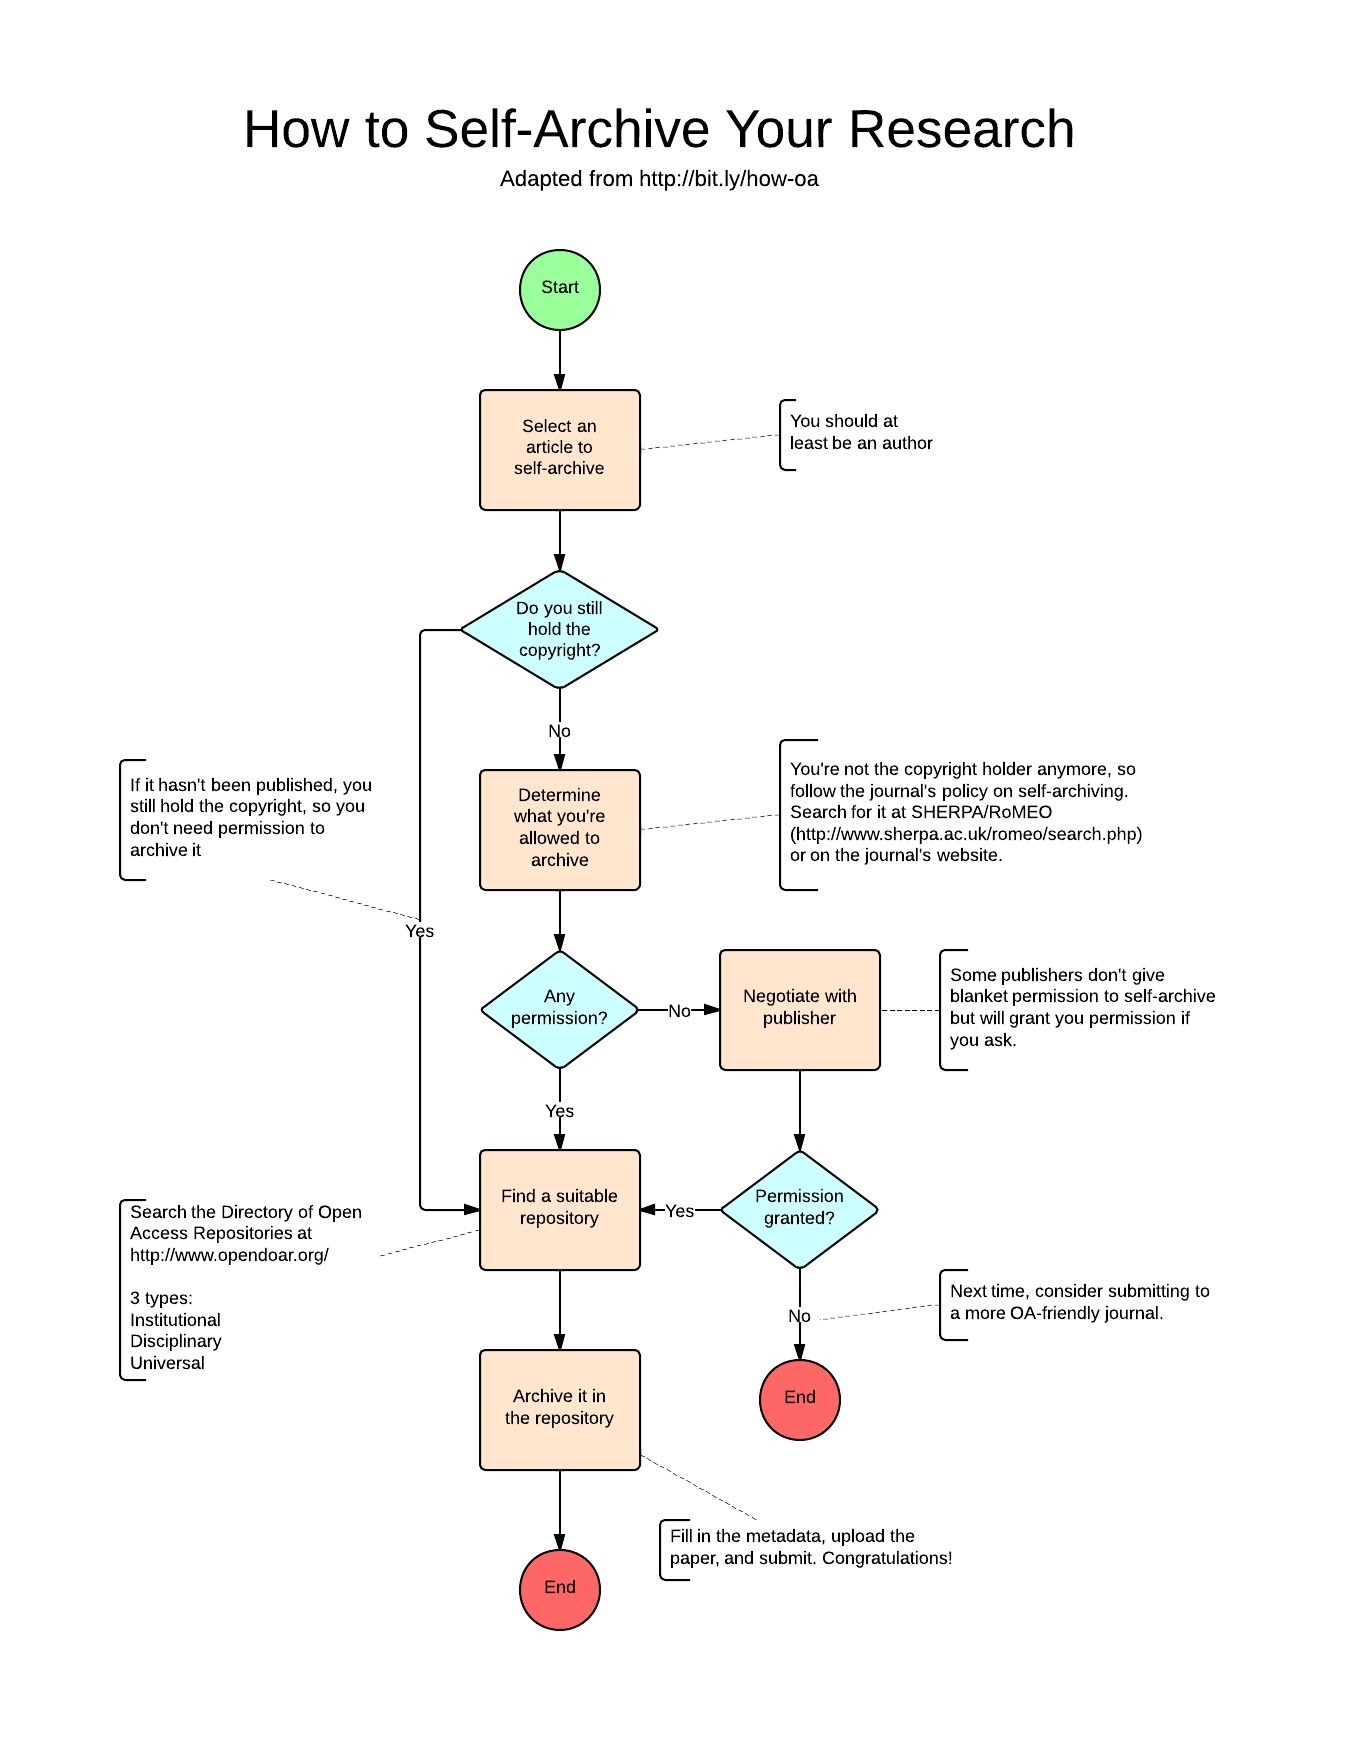 Flowchart showing how to
archive your research